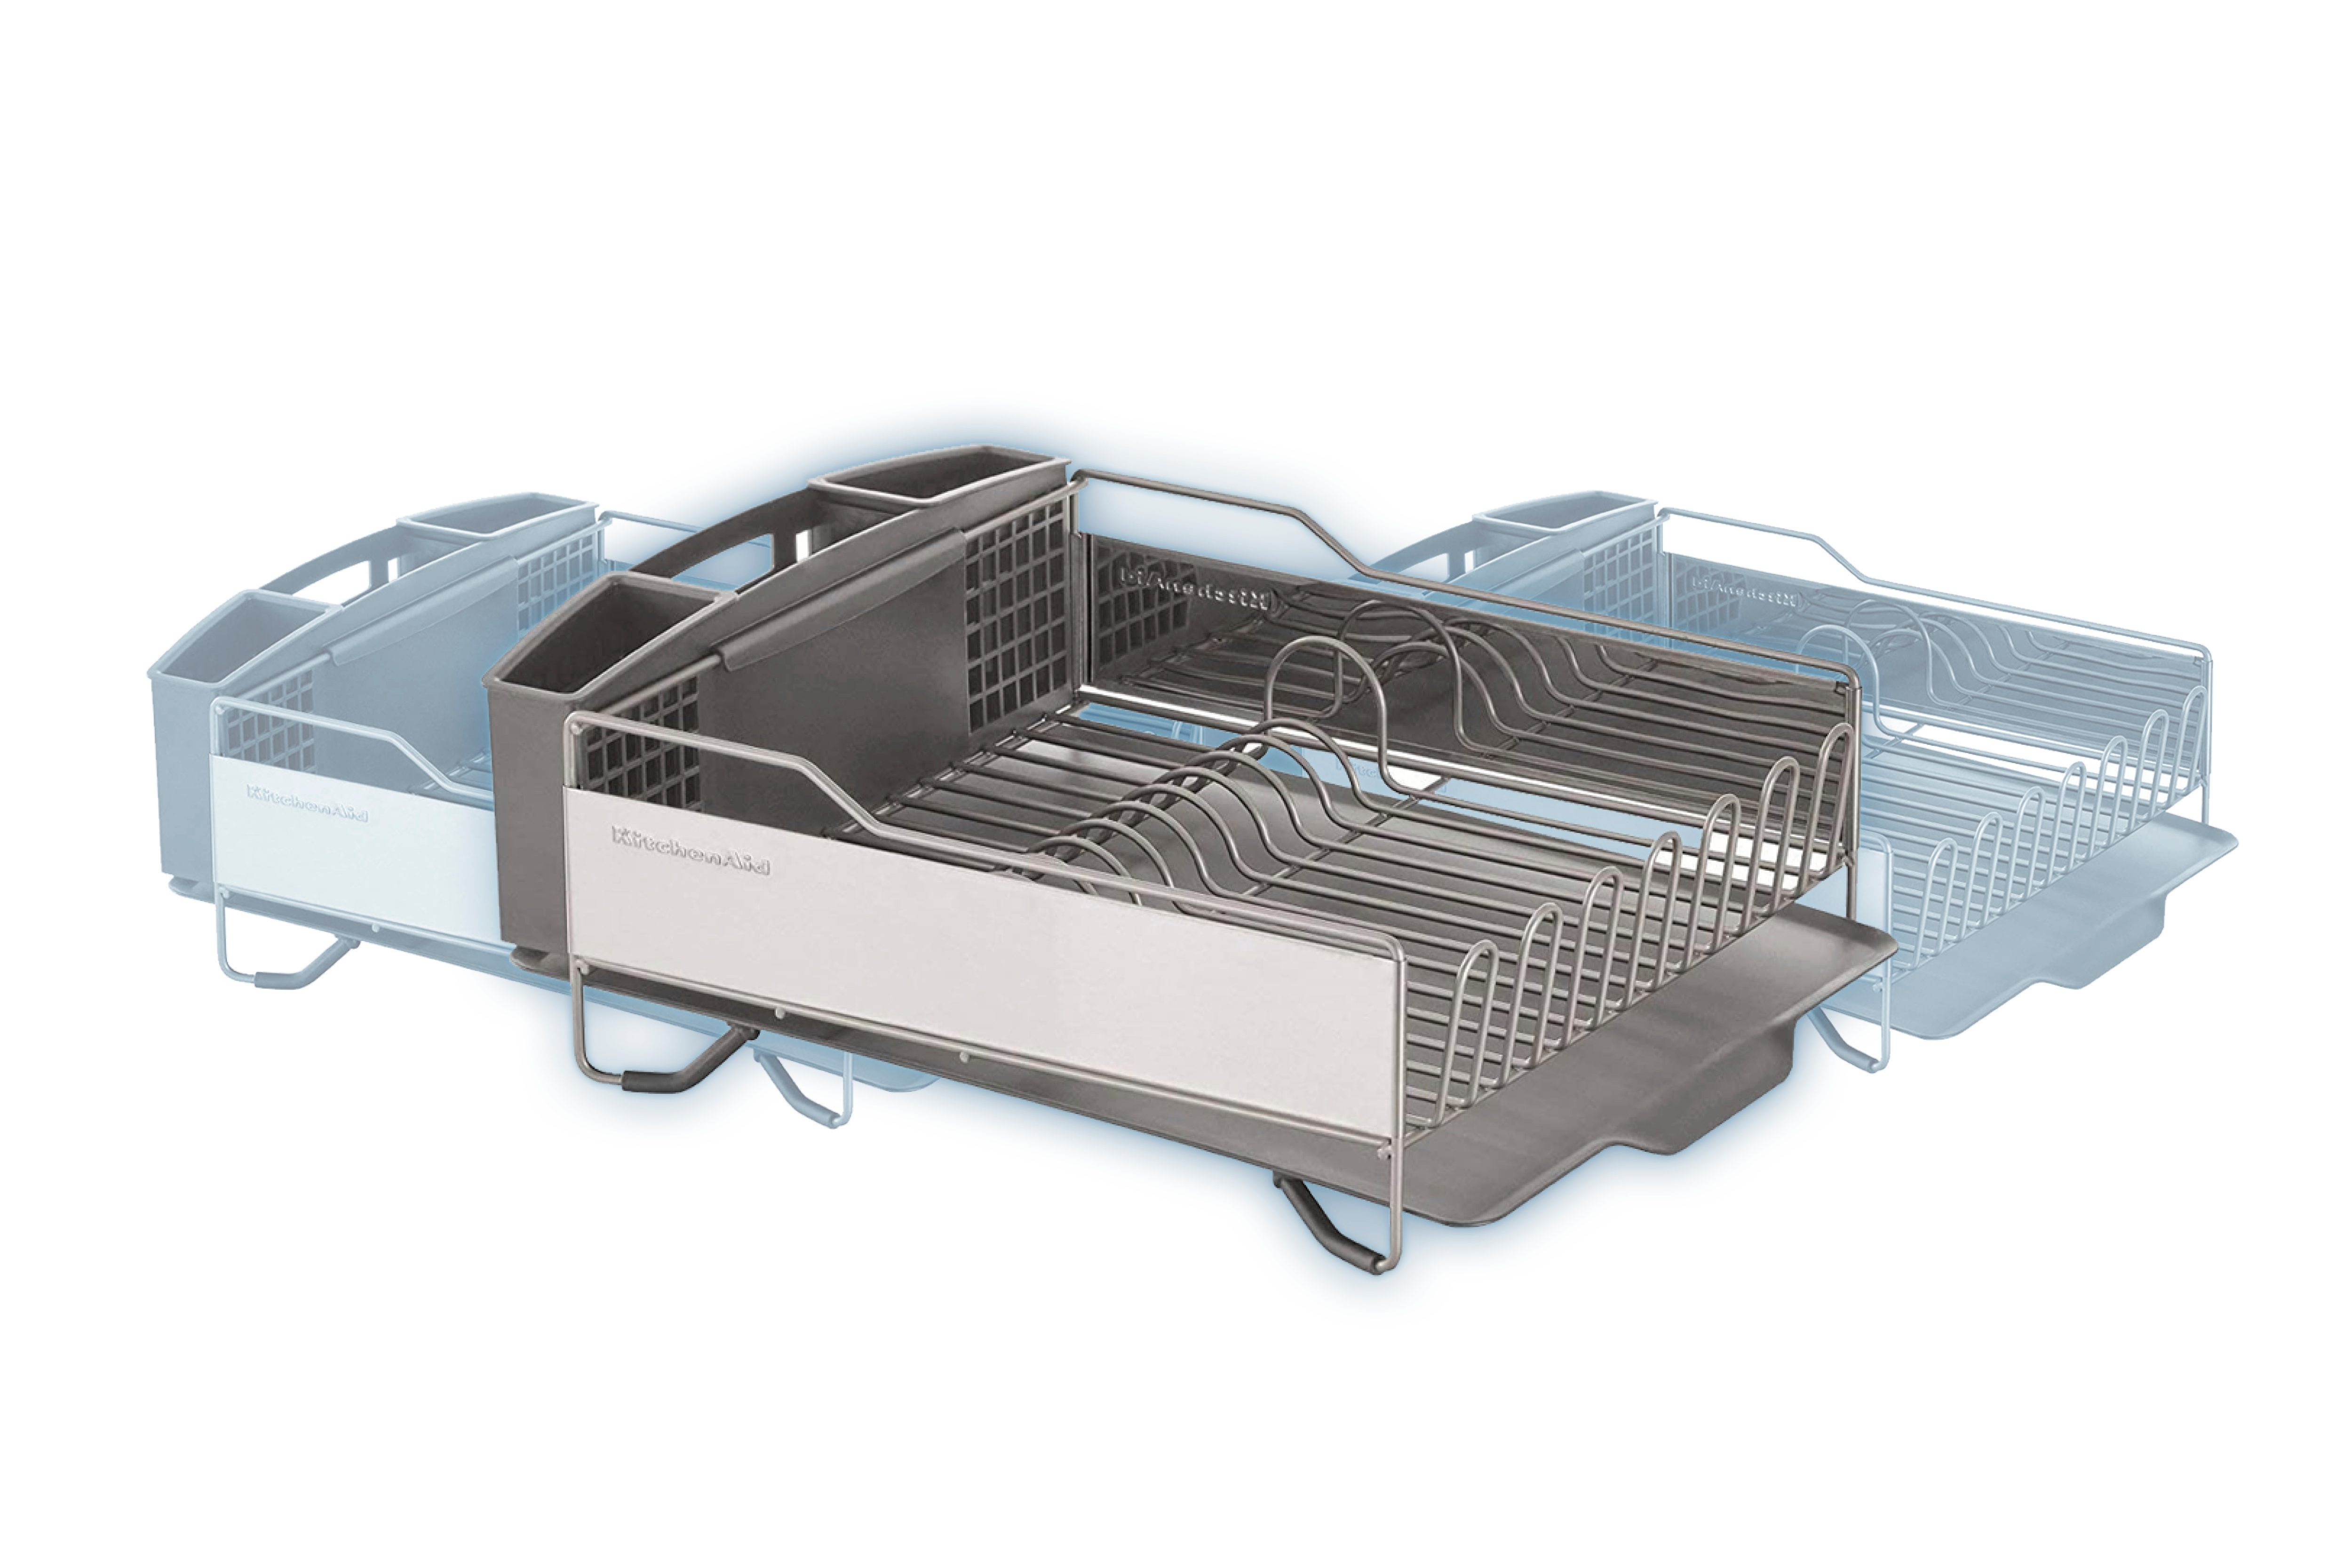 KitchenAid Full-Size Dish Rack: How It Performed in Our Tests